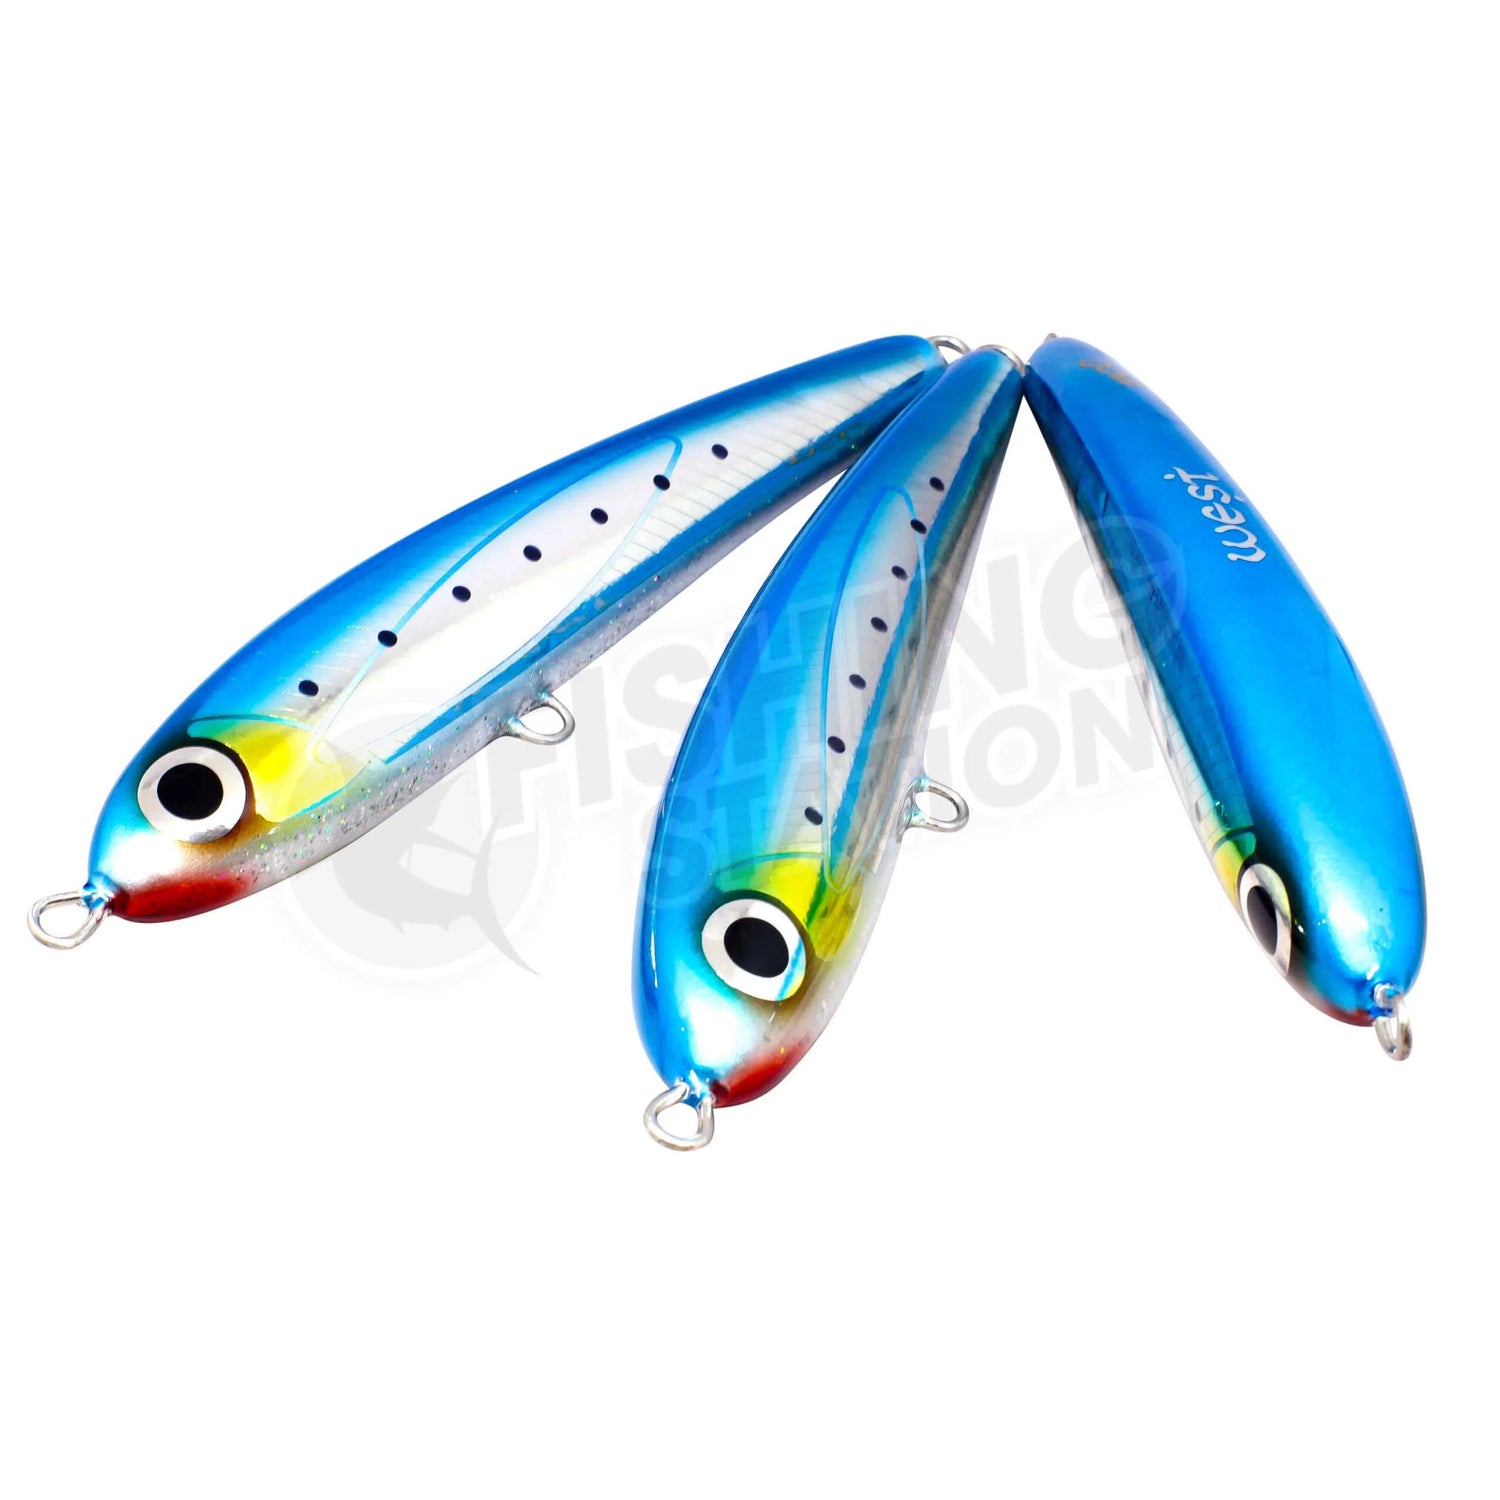 West Coast Poppers Reef Stick Floating Stickbait – Fishing Station